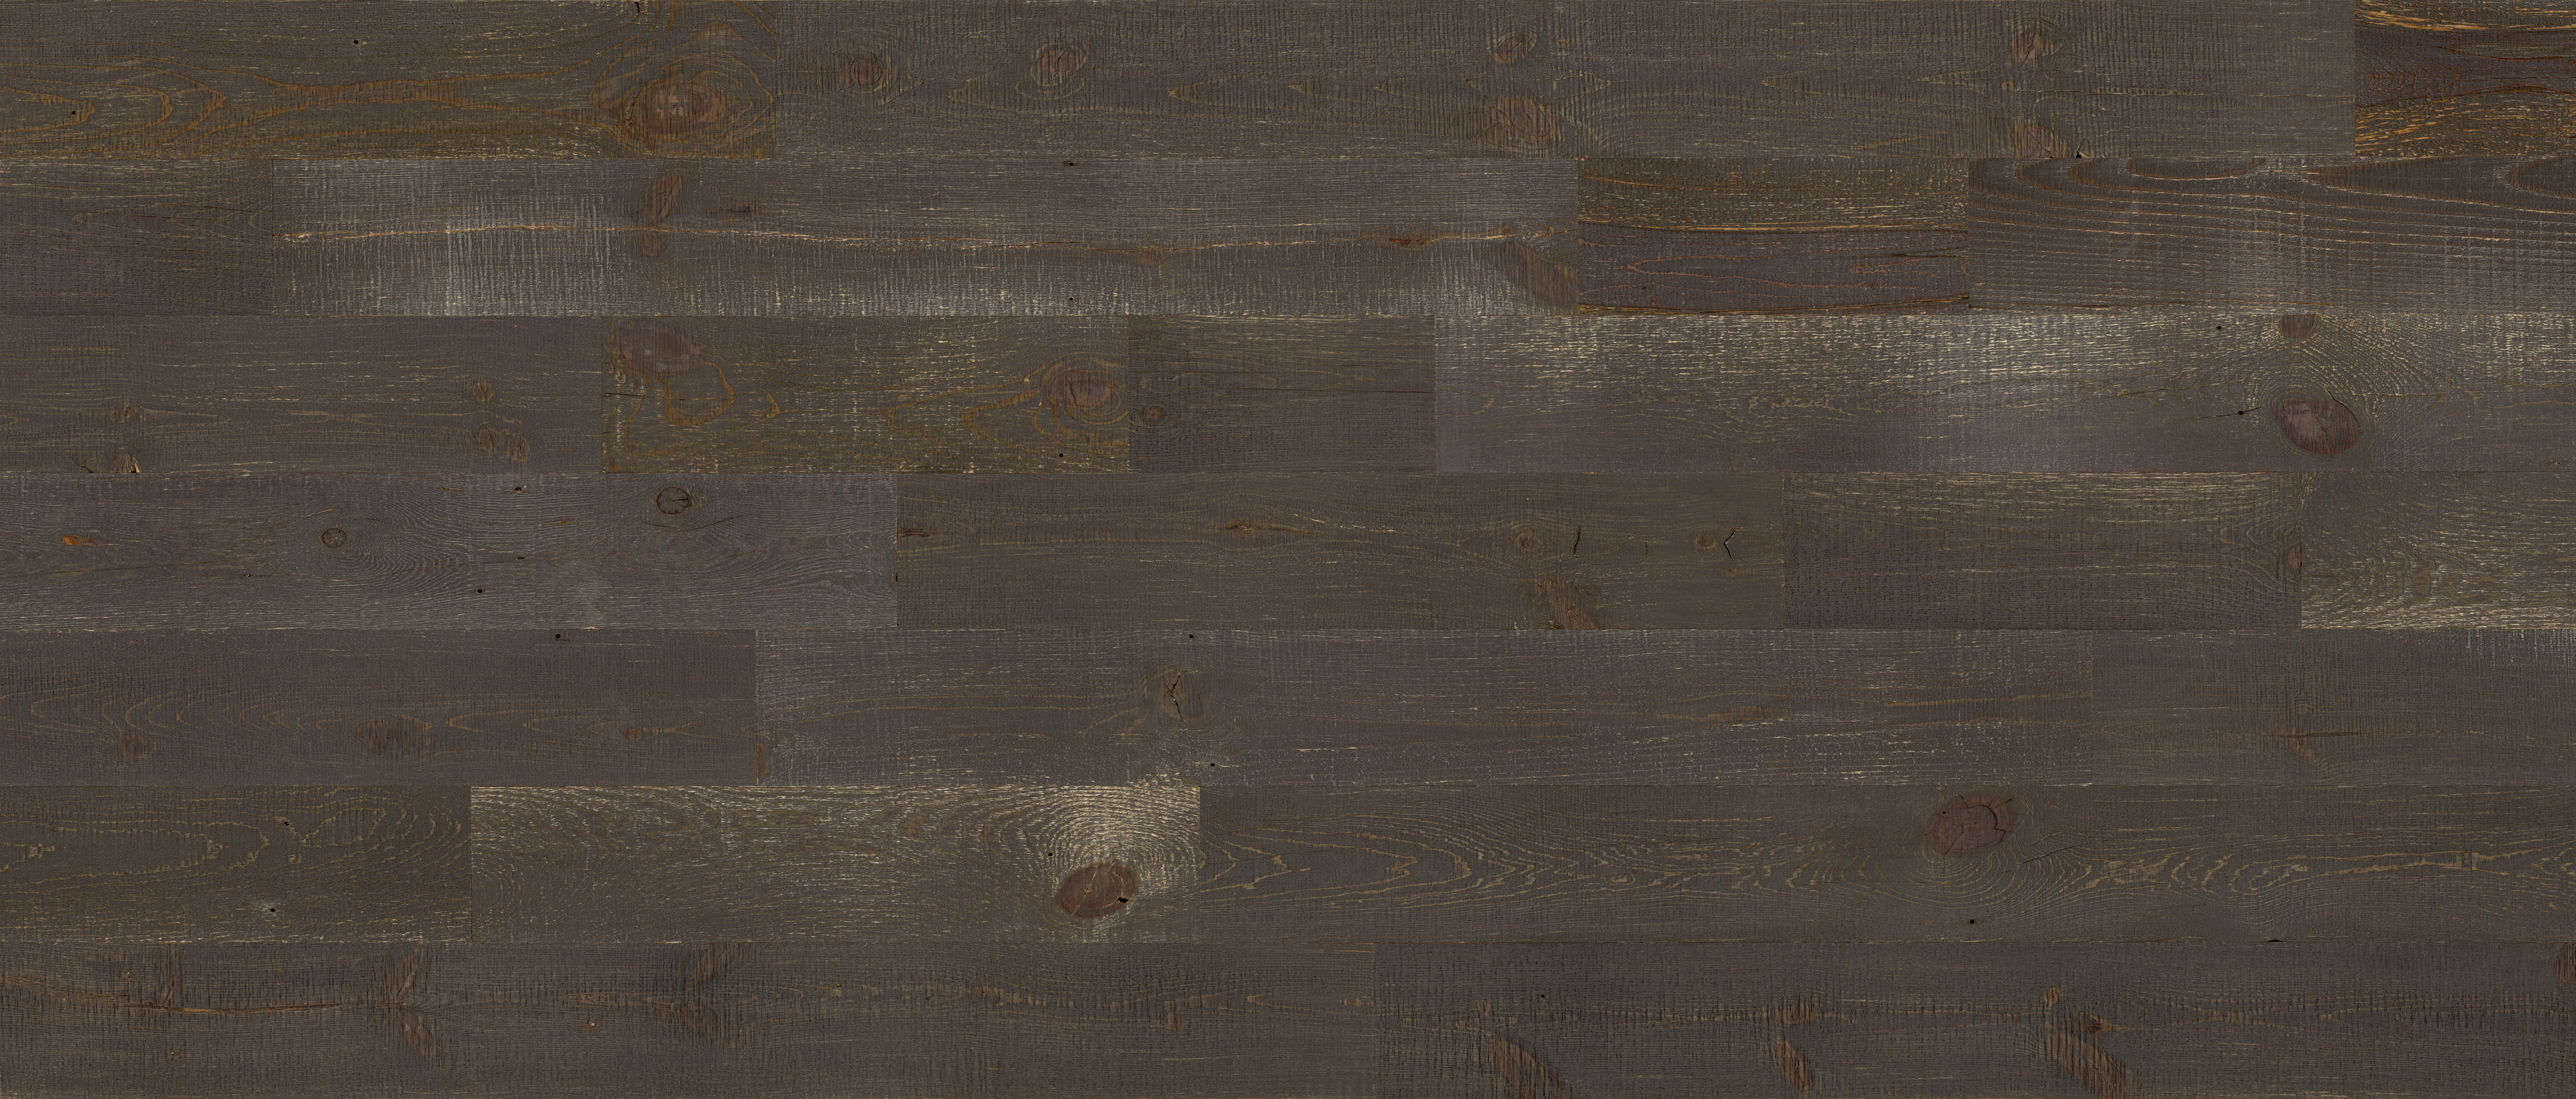 Stikwood Reclaimed Graystone material explorer | real reclaimed barnwood pine peel and stick wood wall and ceiling planks with dark, gray, brown and tan colors.